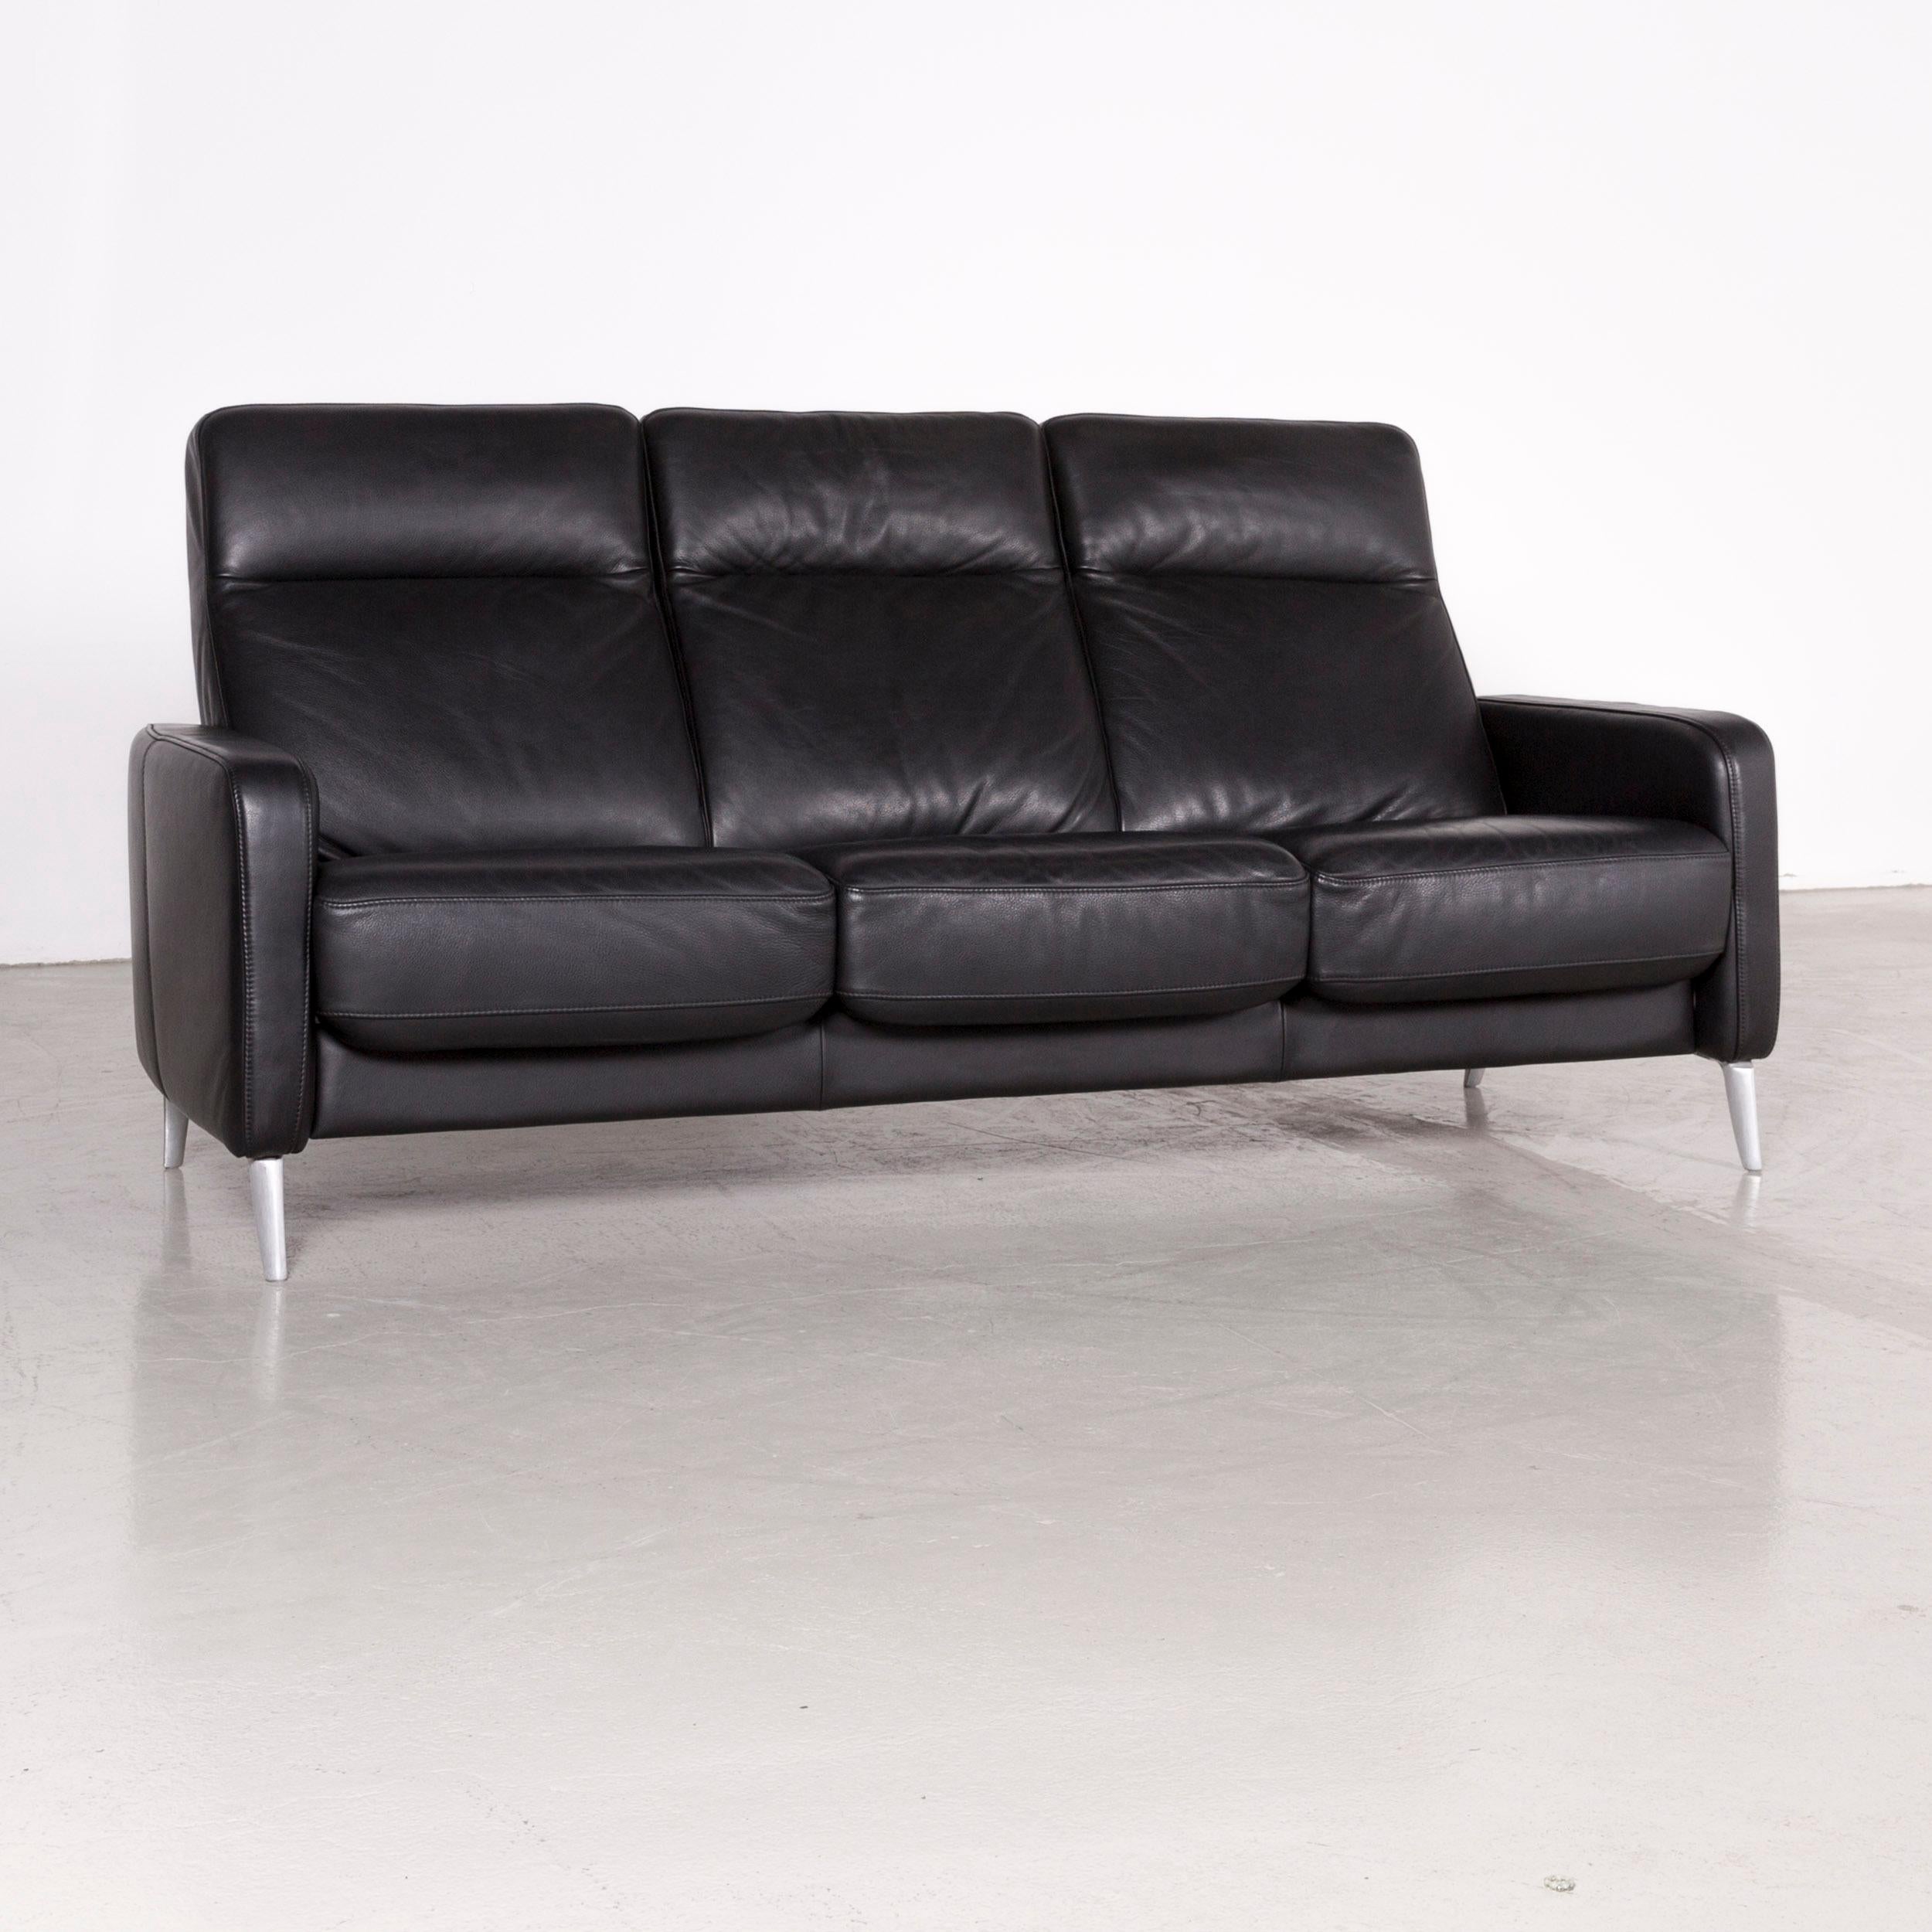 German Musterring Designer Leather Sofa Black Three-Seat Couch For Sale